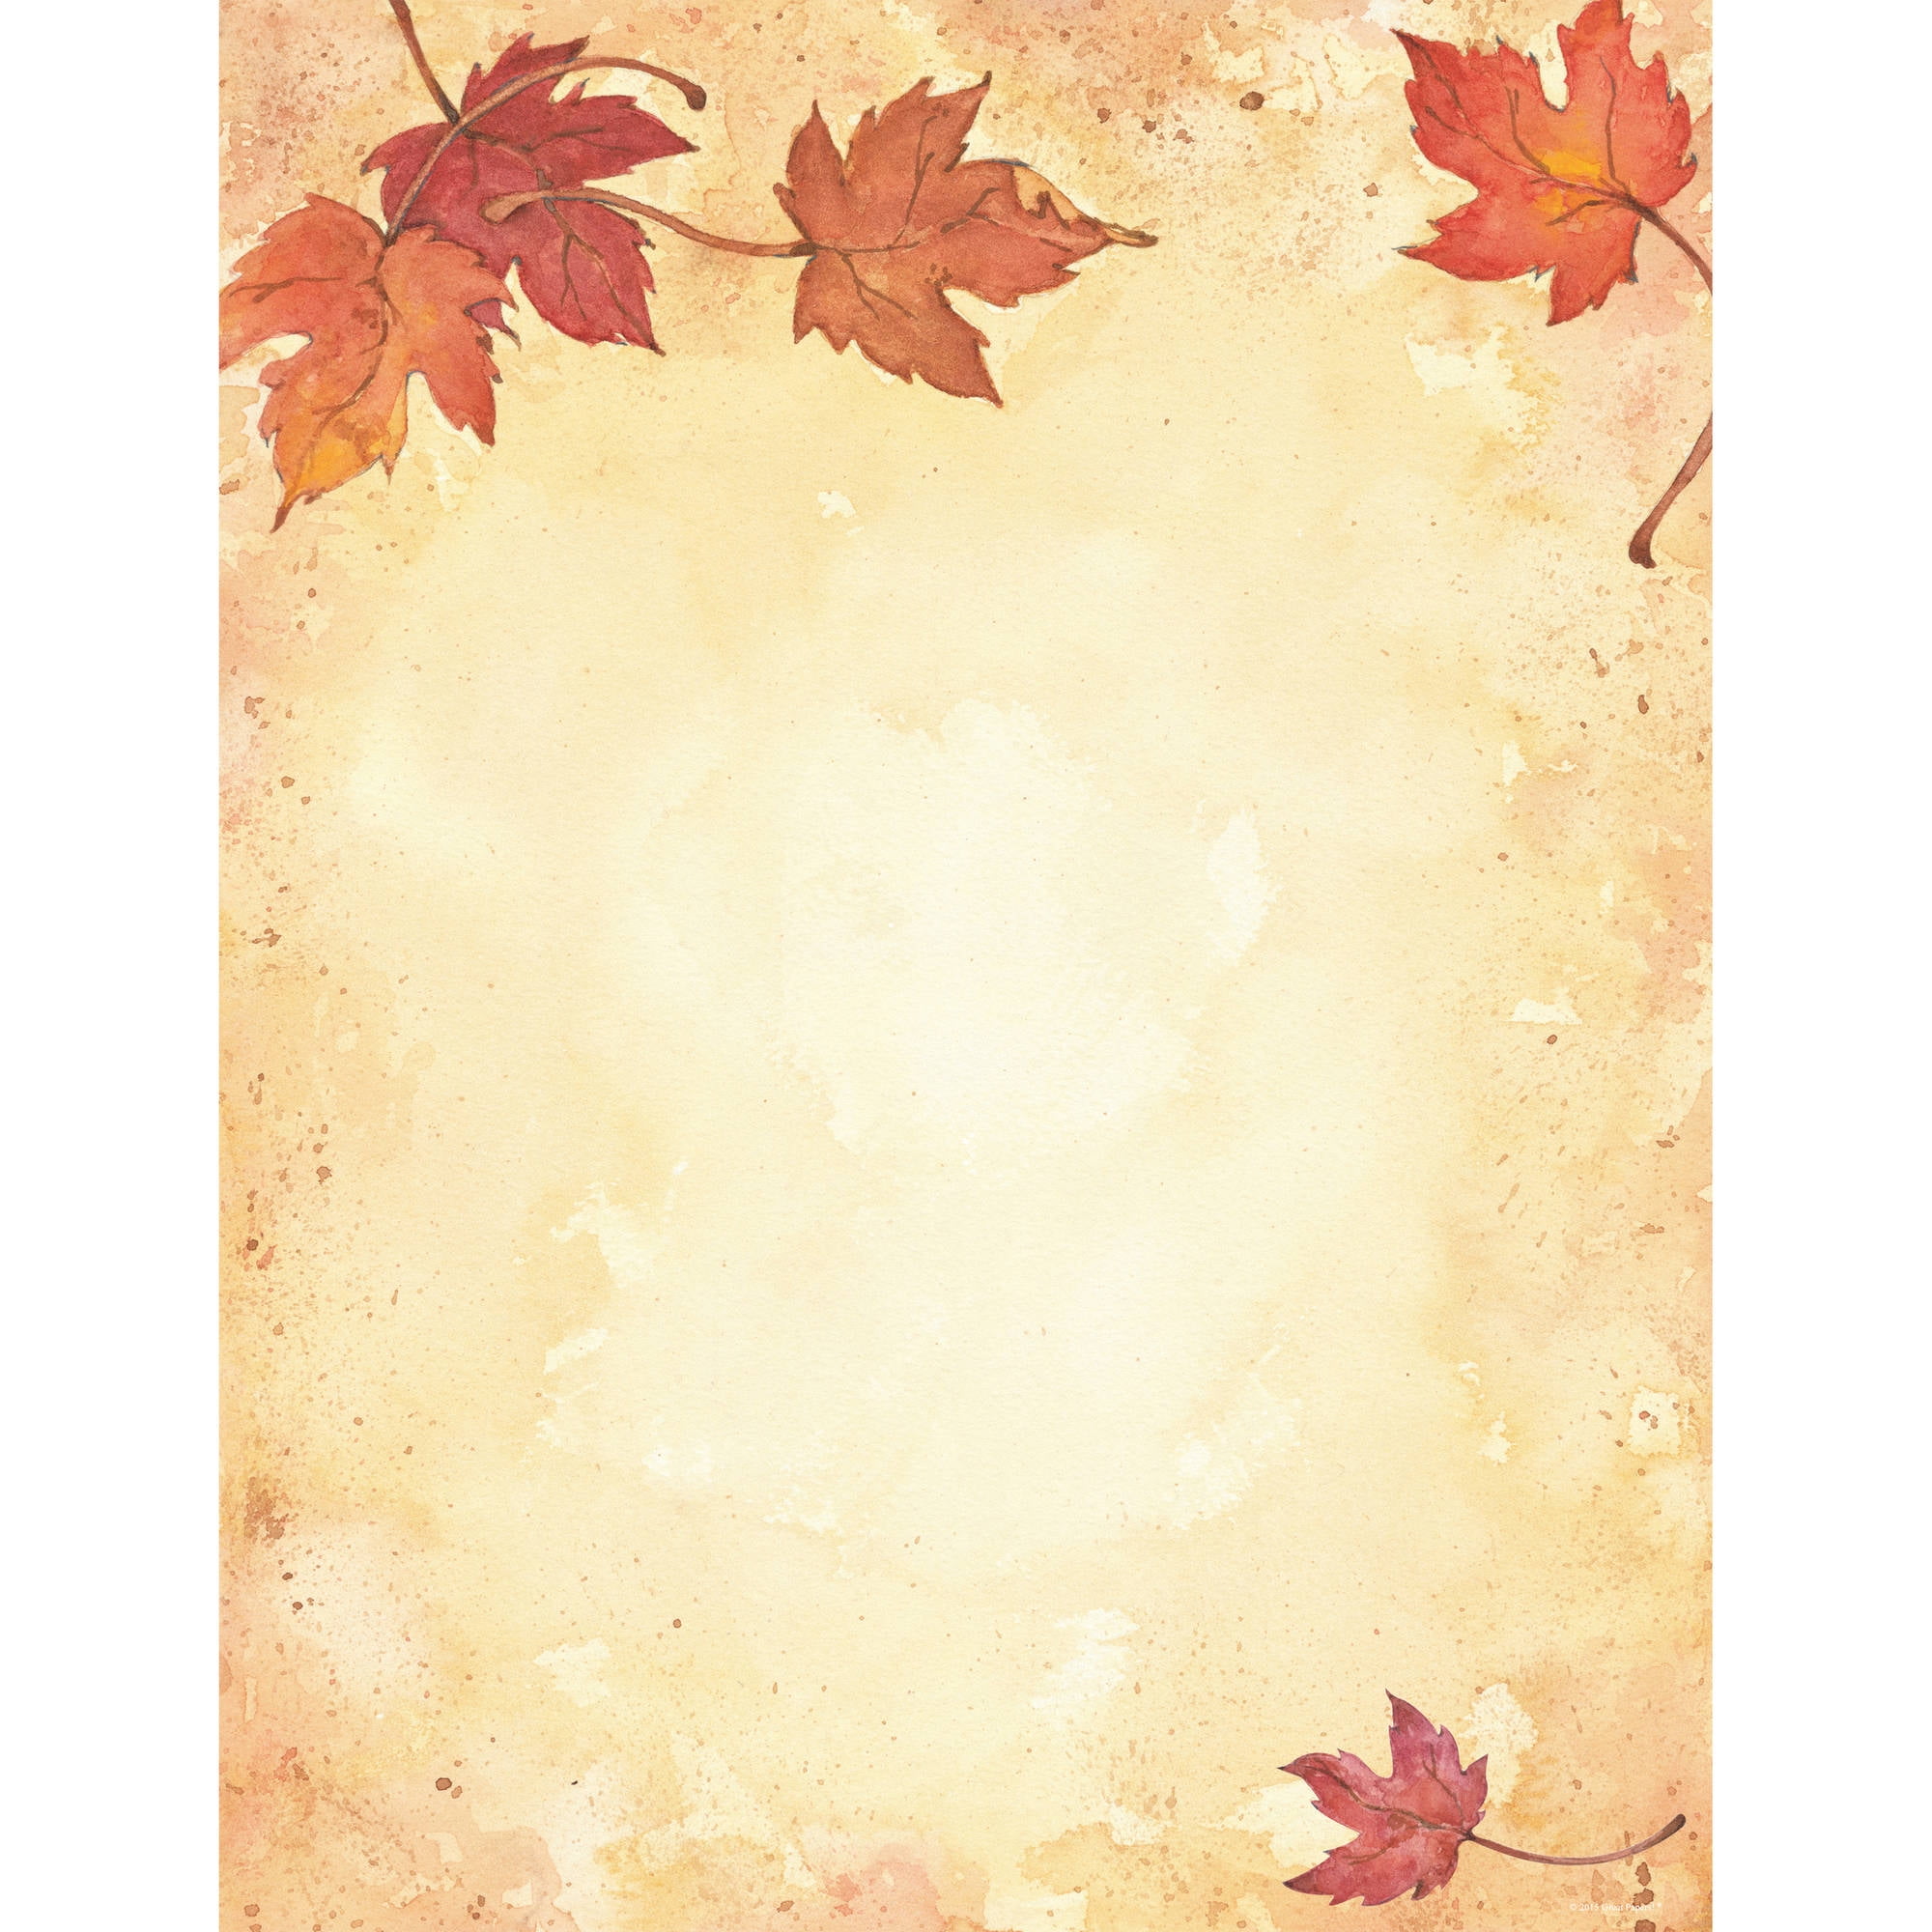 great-papers-fall-leaves-letterhead-25-count-walmart